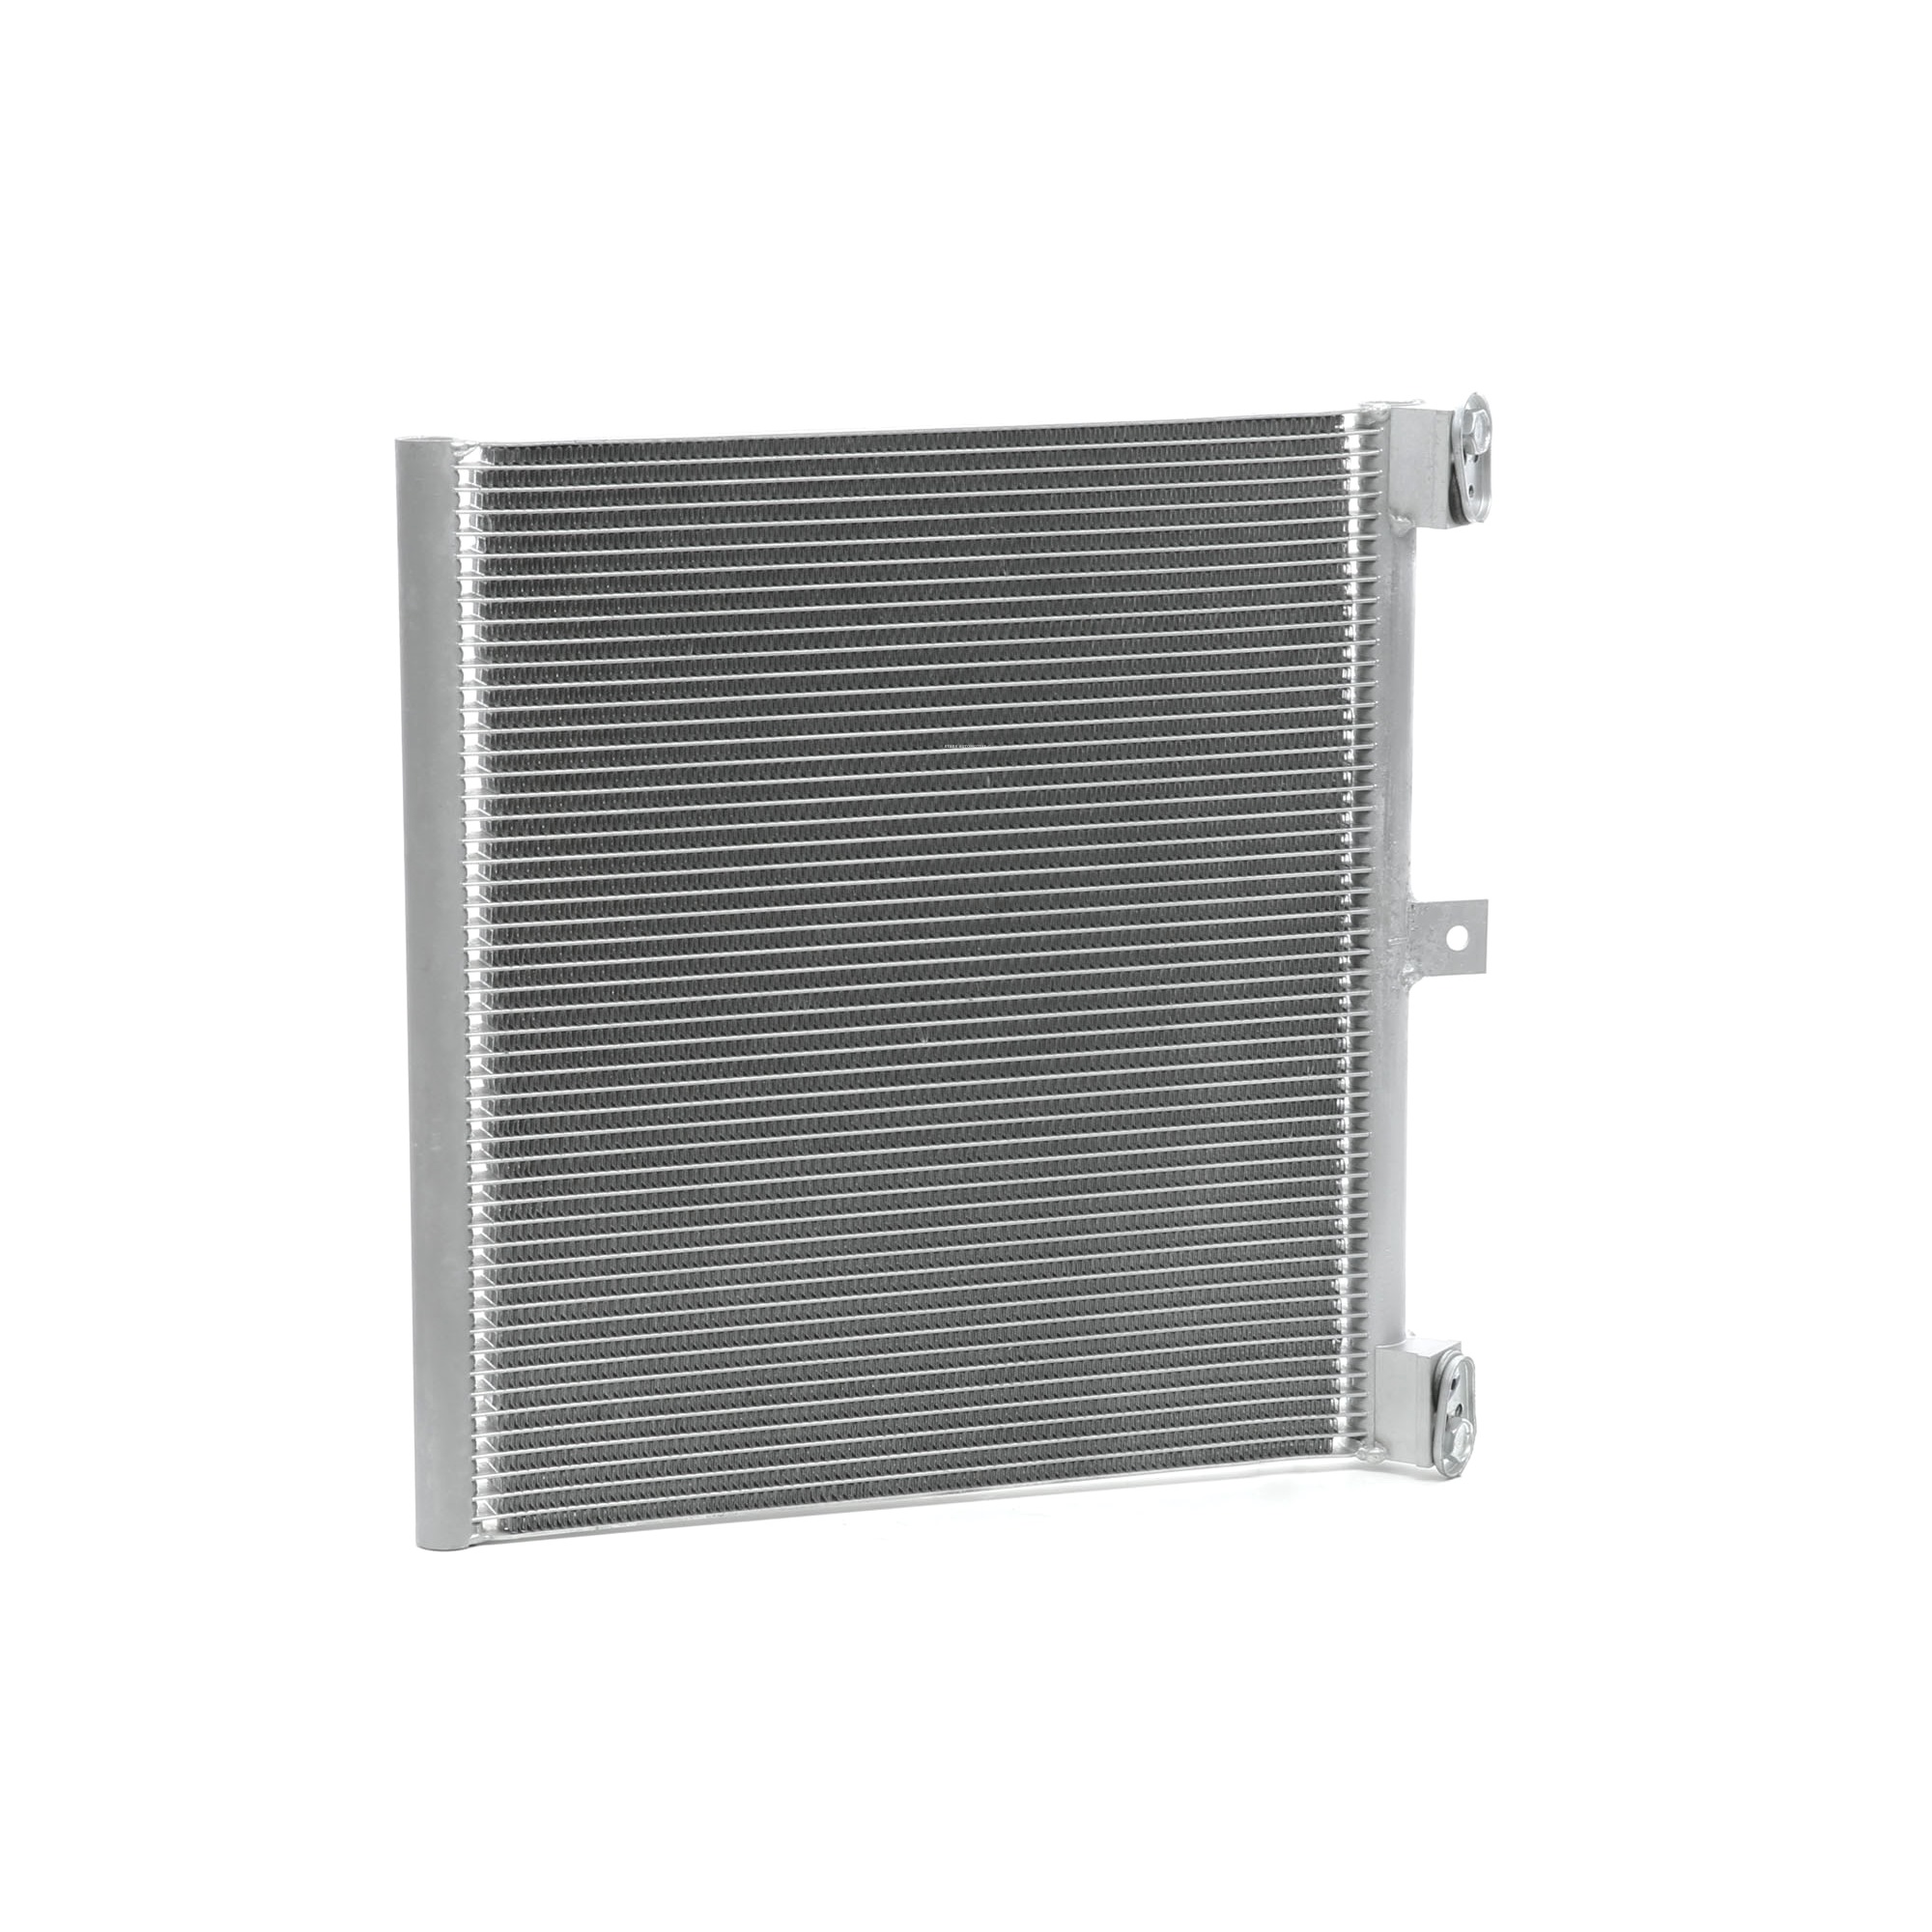 STARK SKCD-0110465 Air conditioning condenser without dryer, 300x345, 15,3mm, 15,3mm, Aluminium, R 134a